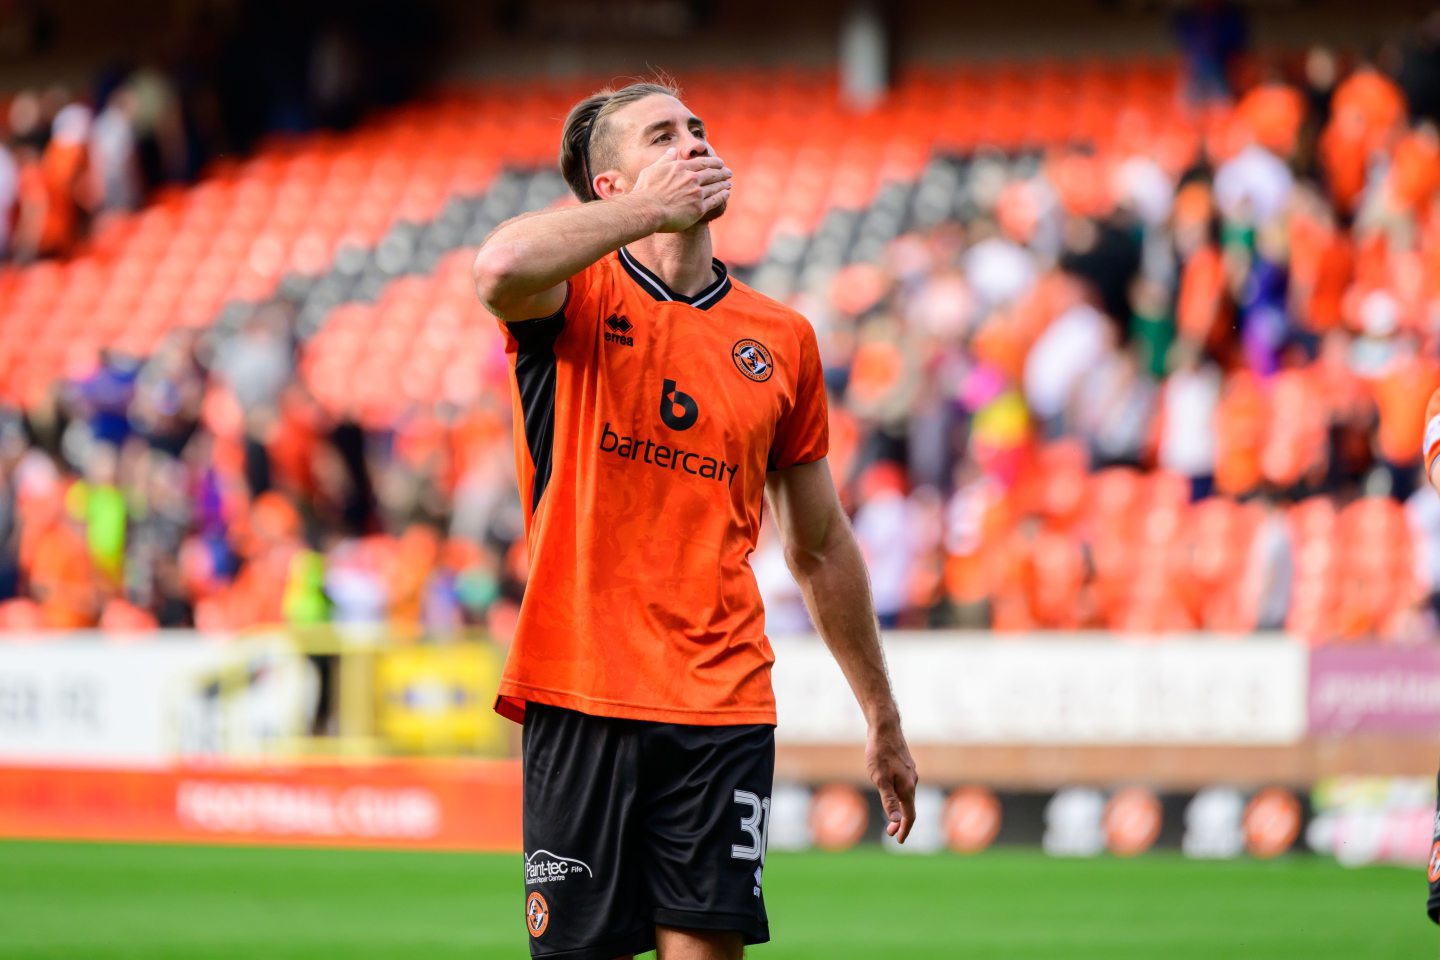 Dundee United defender Declan Gallagher blows a kiss to the crowd